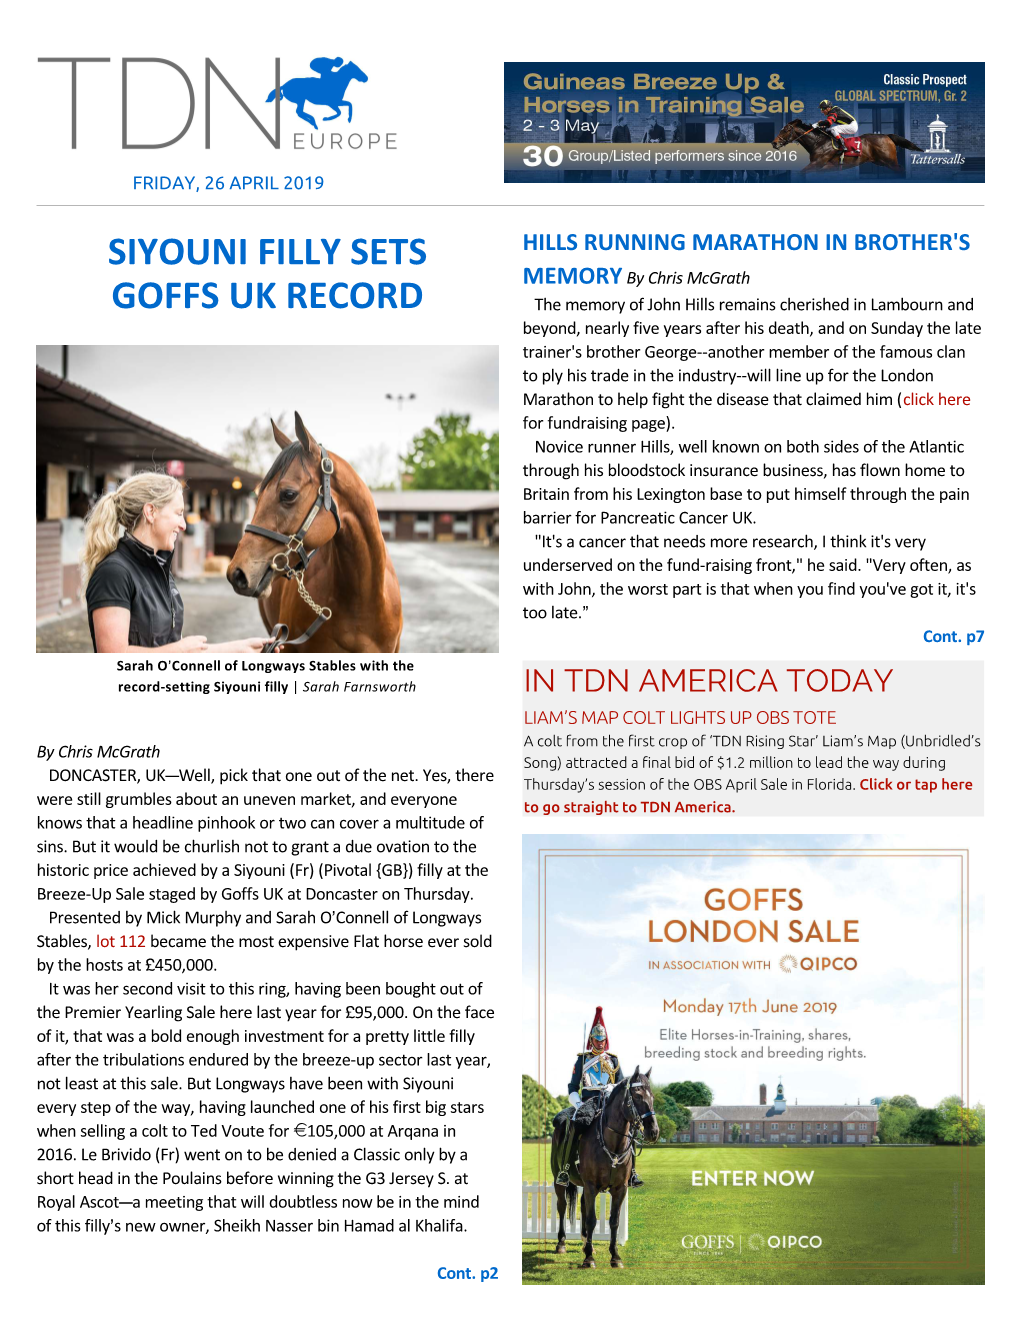 Siyouni Filly Sets Goffs UK Record Cont